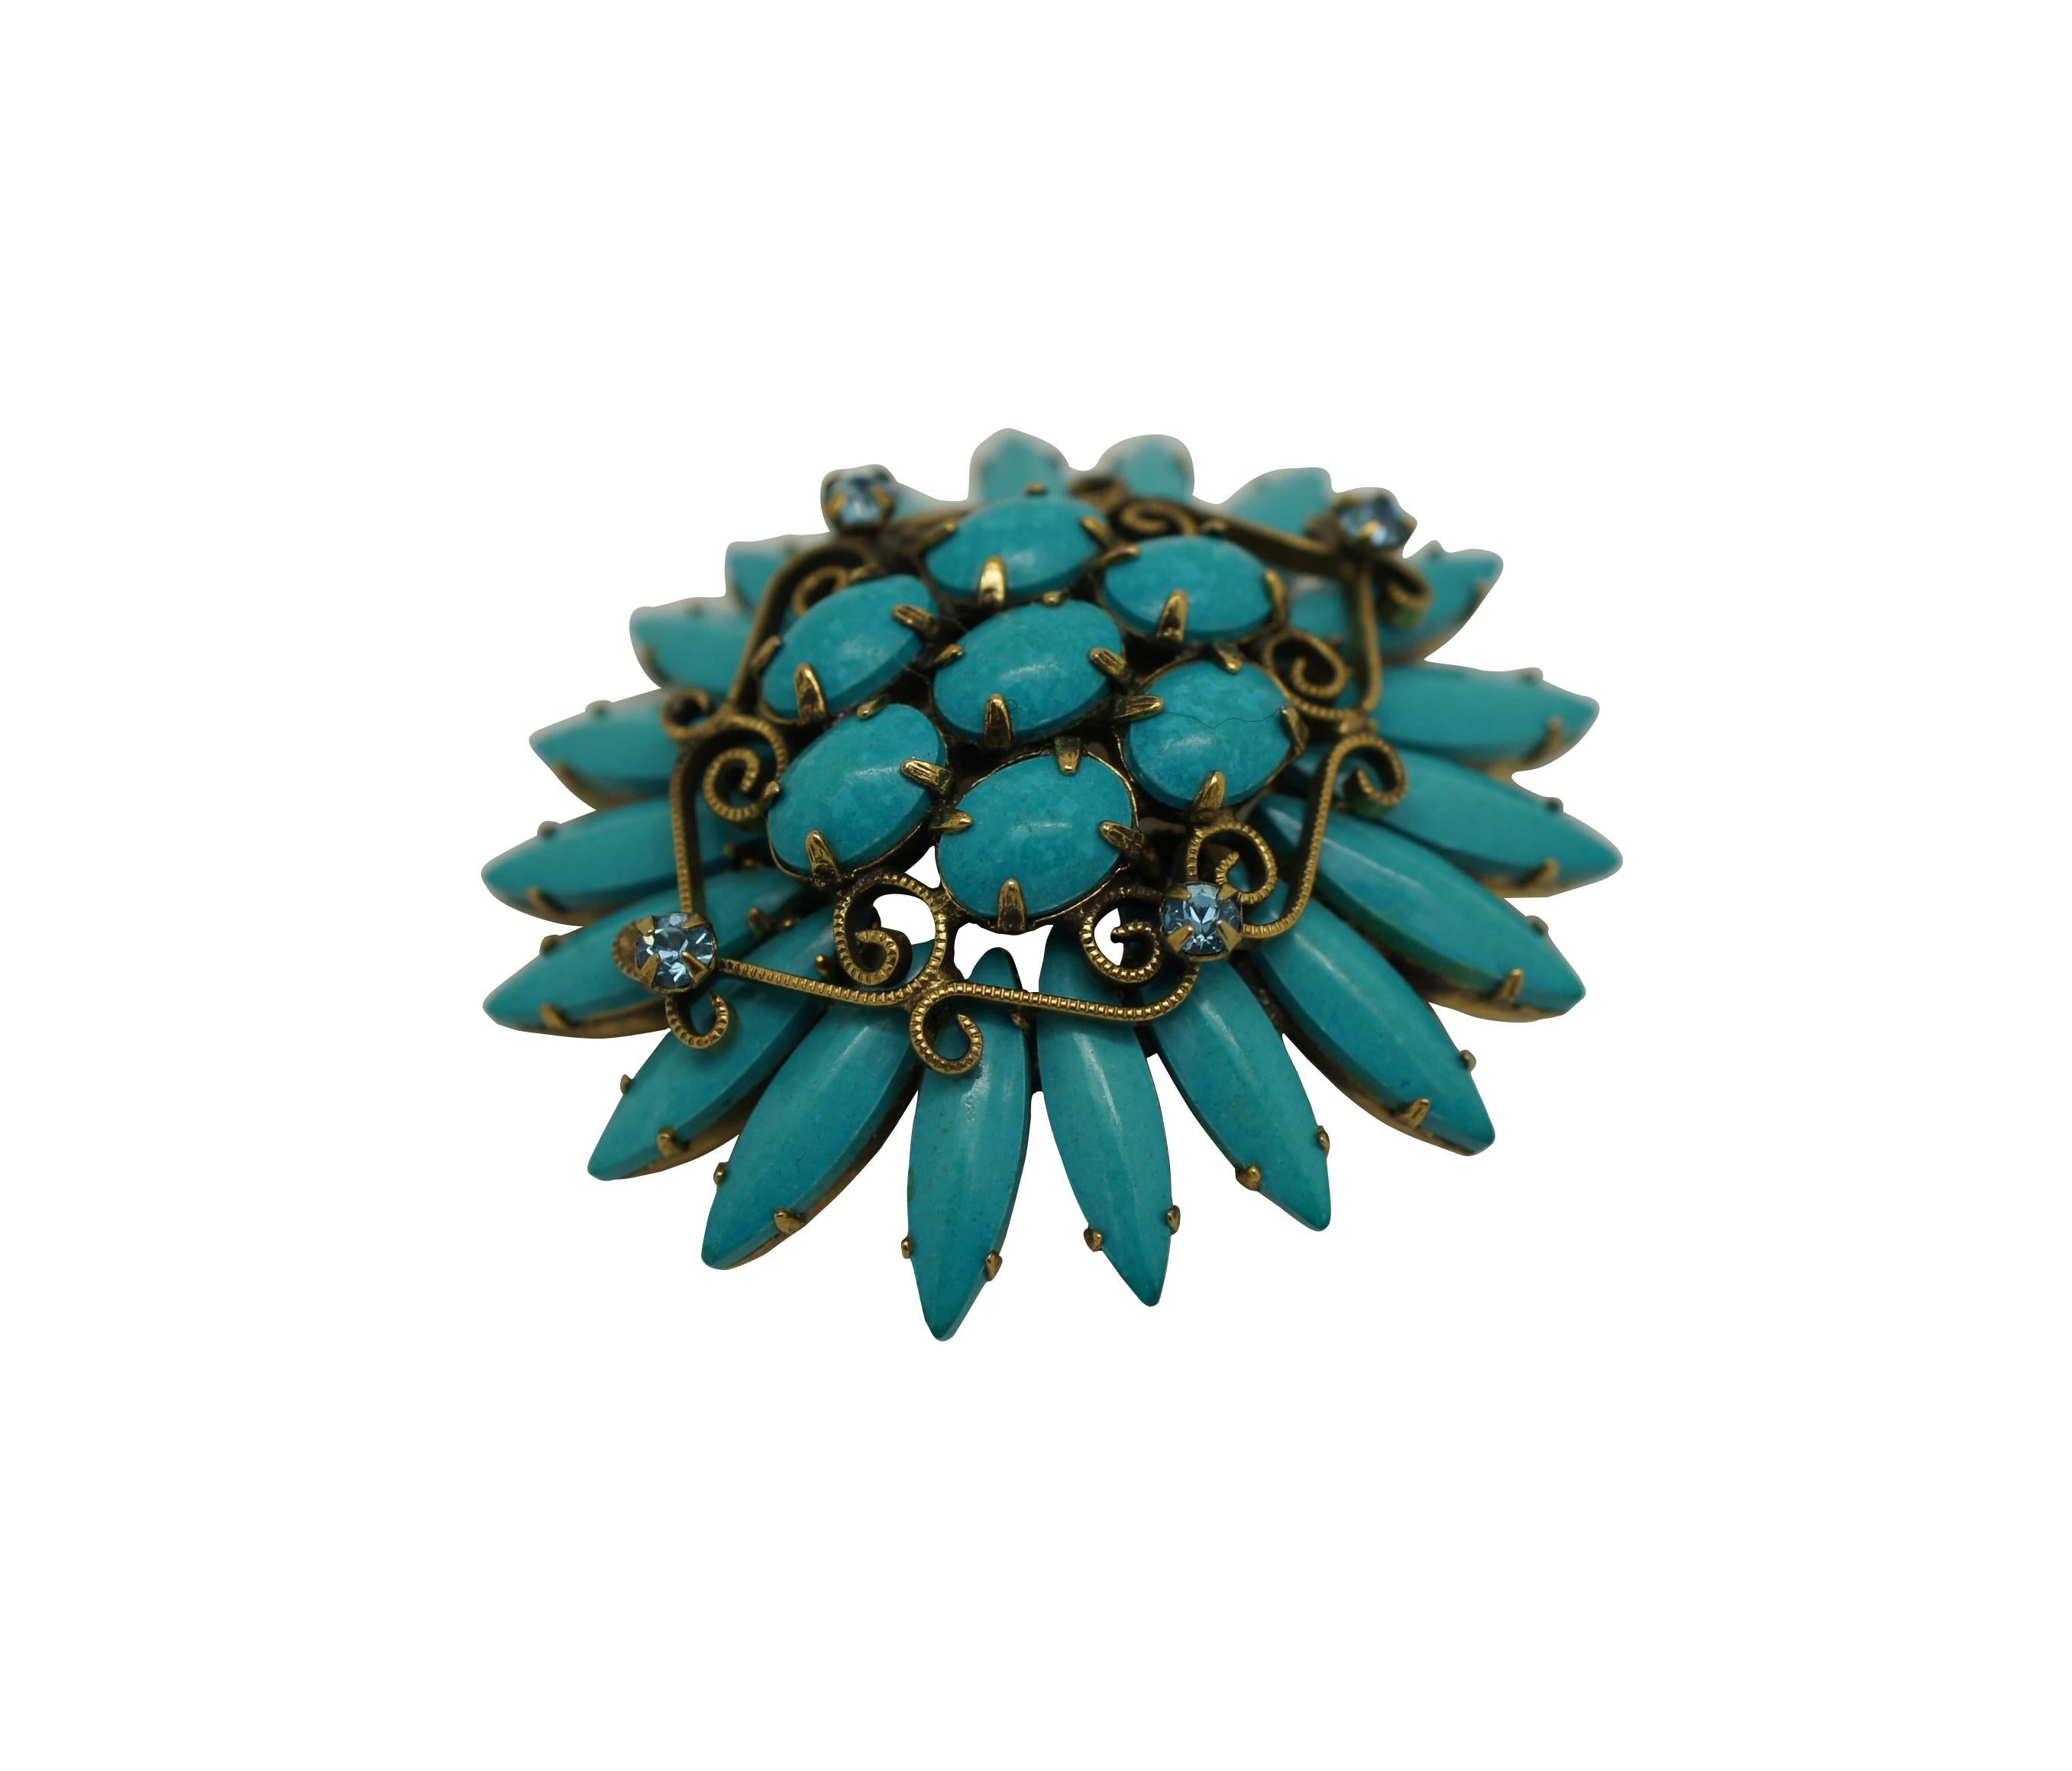 Mid 20th century Original by Robert pin / brooch featuring a Southwest inspired design of turquoise stones arranged in the shape of a flower, accented with scrolling brass and aqua rhinestones.

